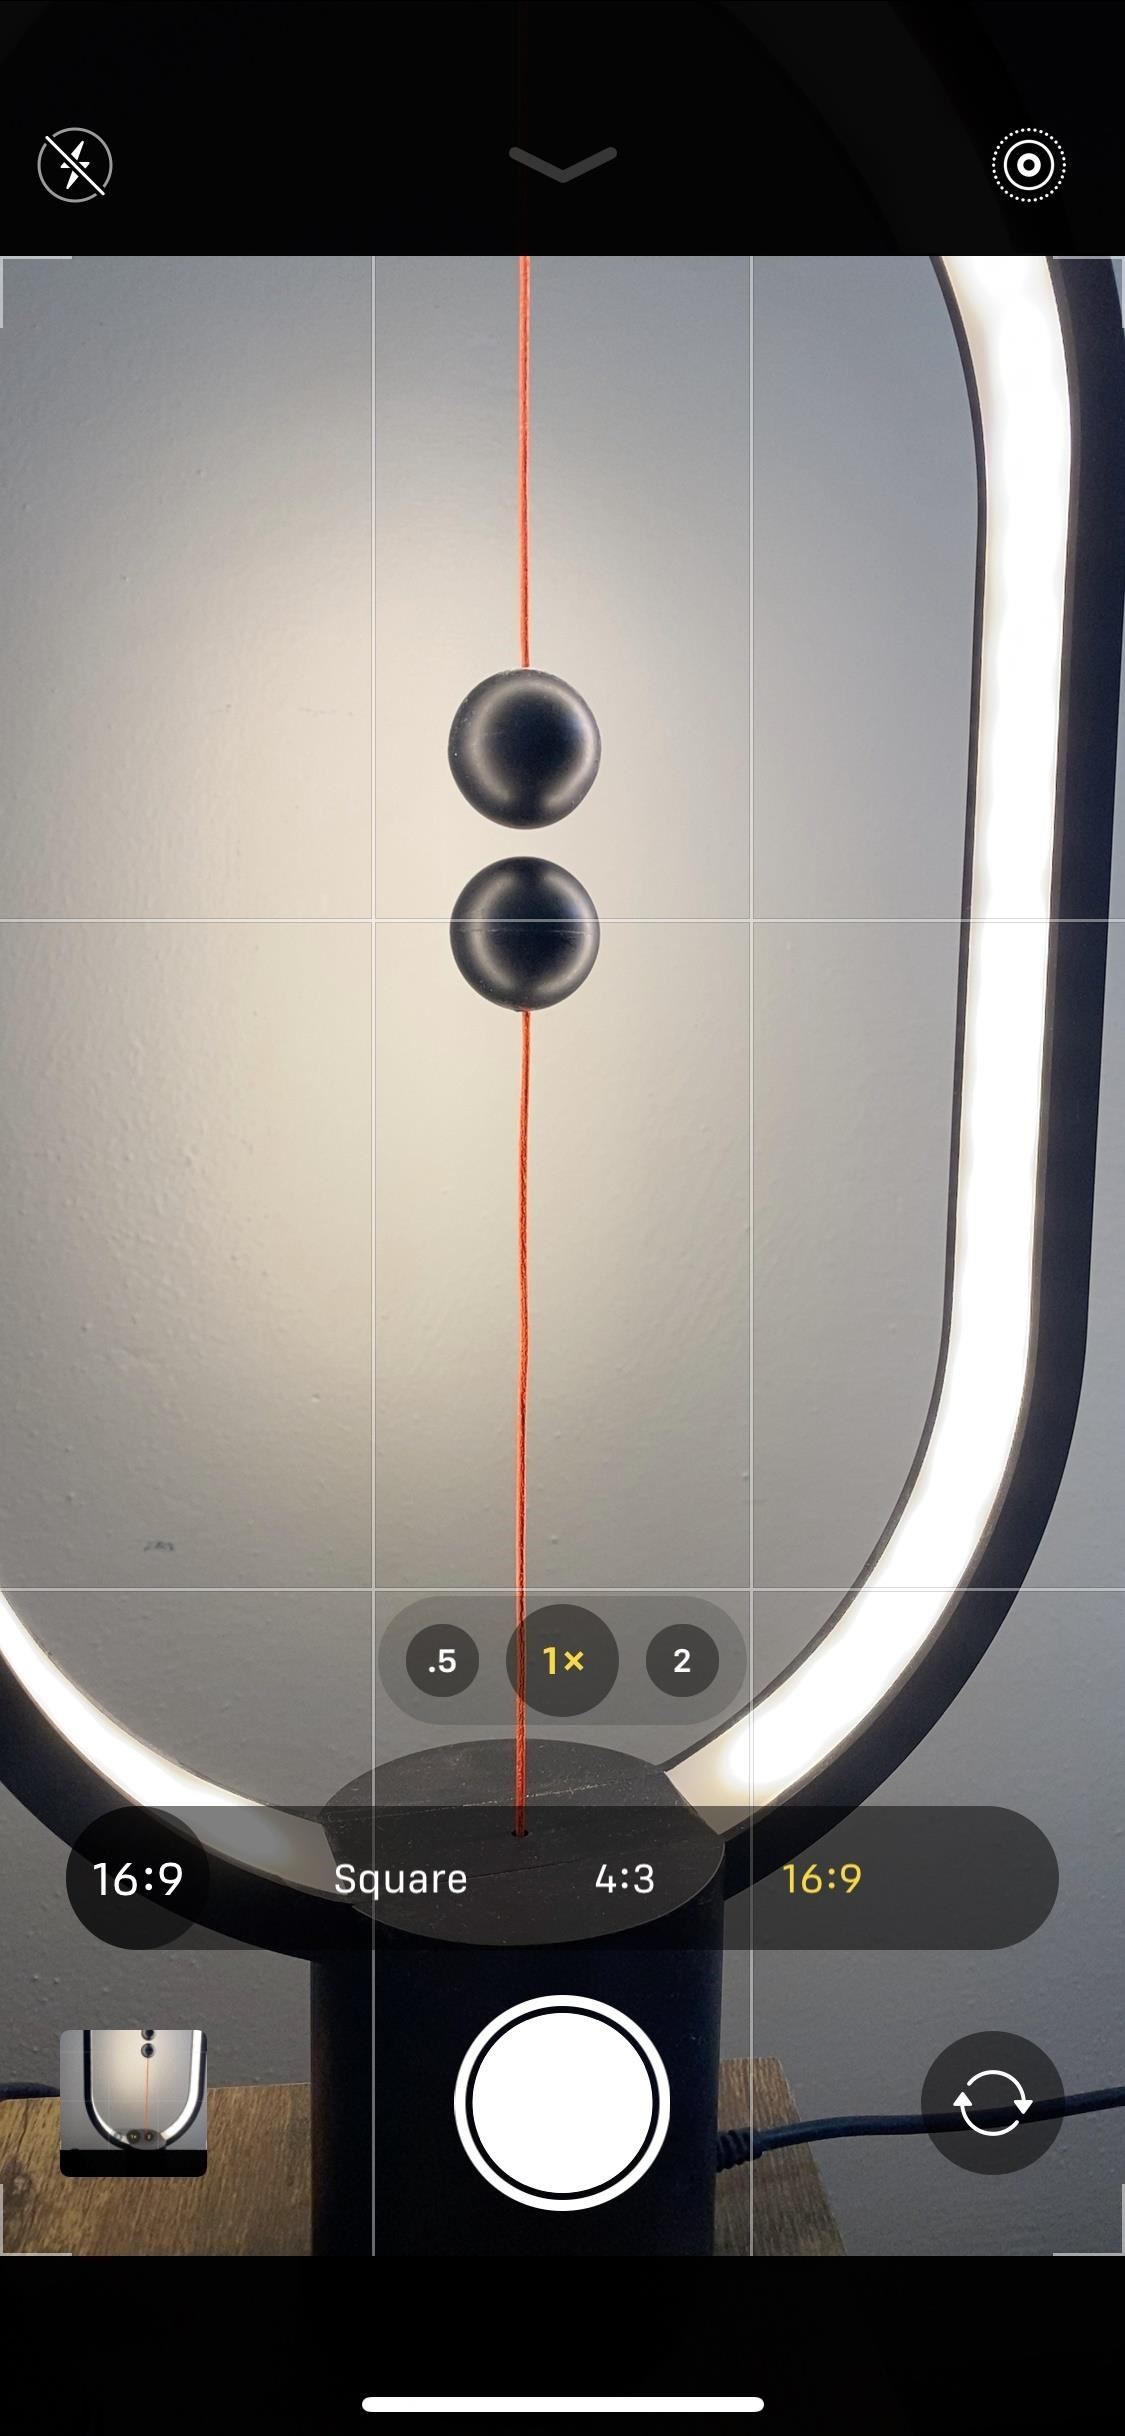 Make Your iPhone Camera Open to Your Last Used Shooting Settings So You're Always Ready